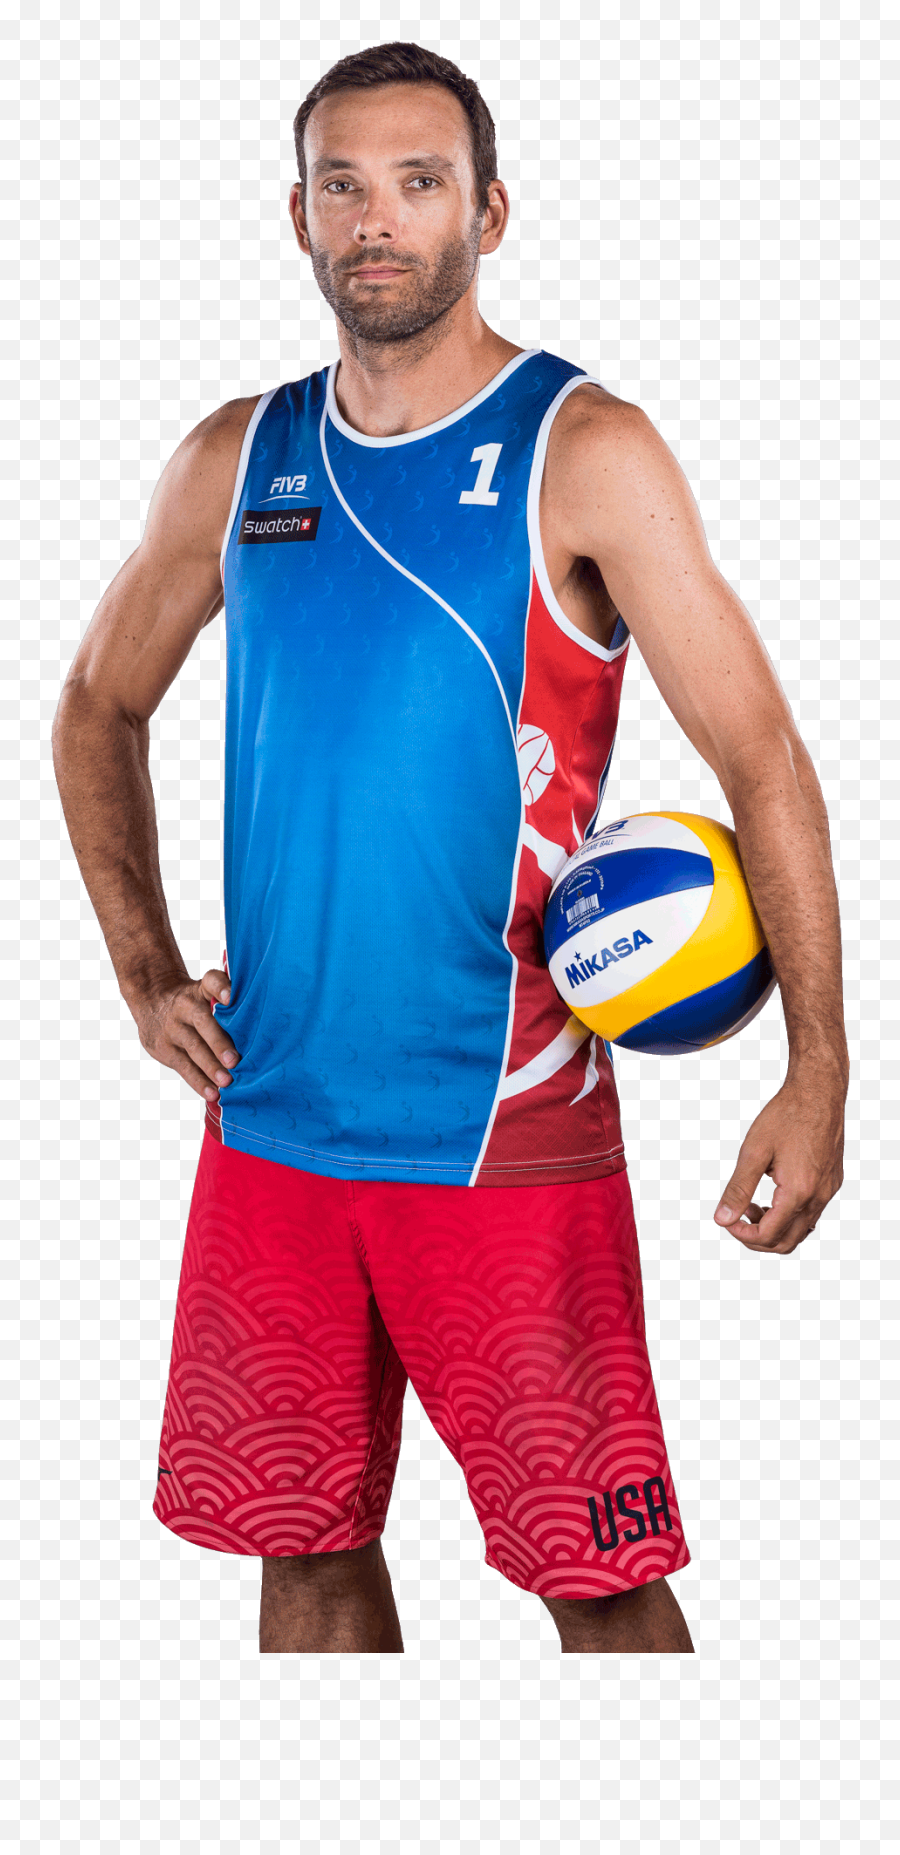 Volleyball Player Png - Billy Allen Volleyball Player Volleyball Player,Volleyball Player Png